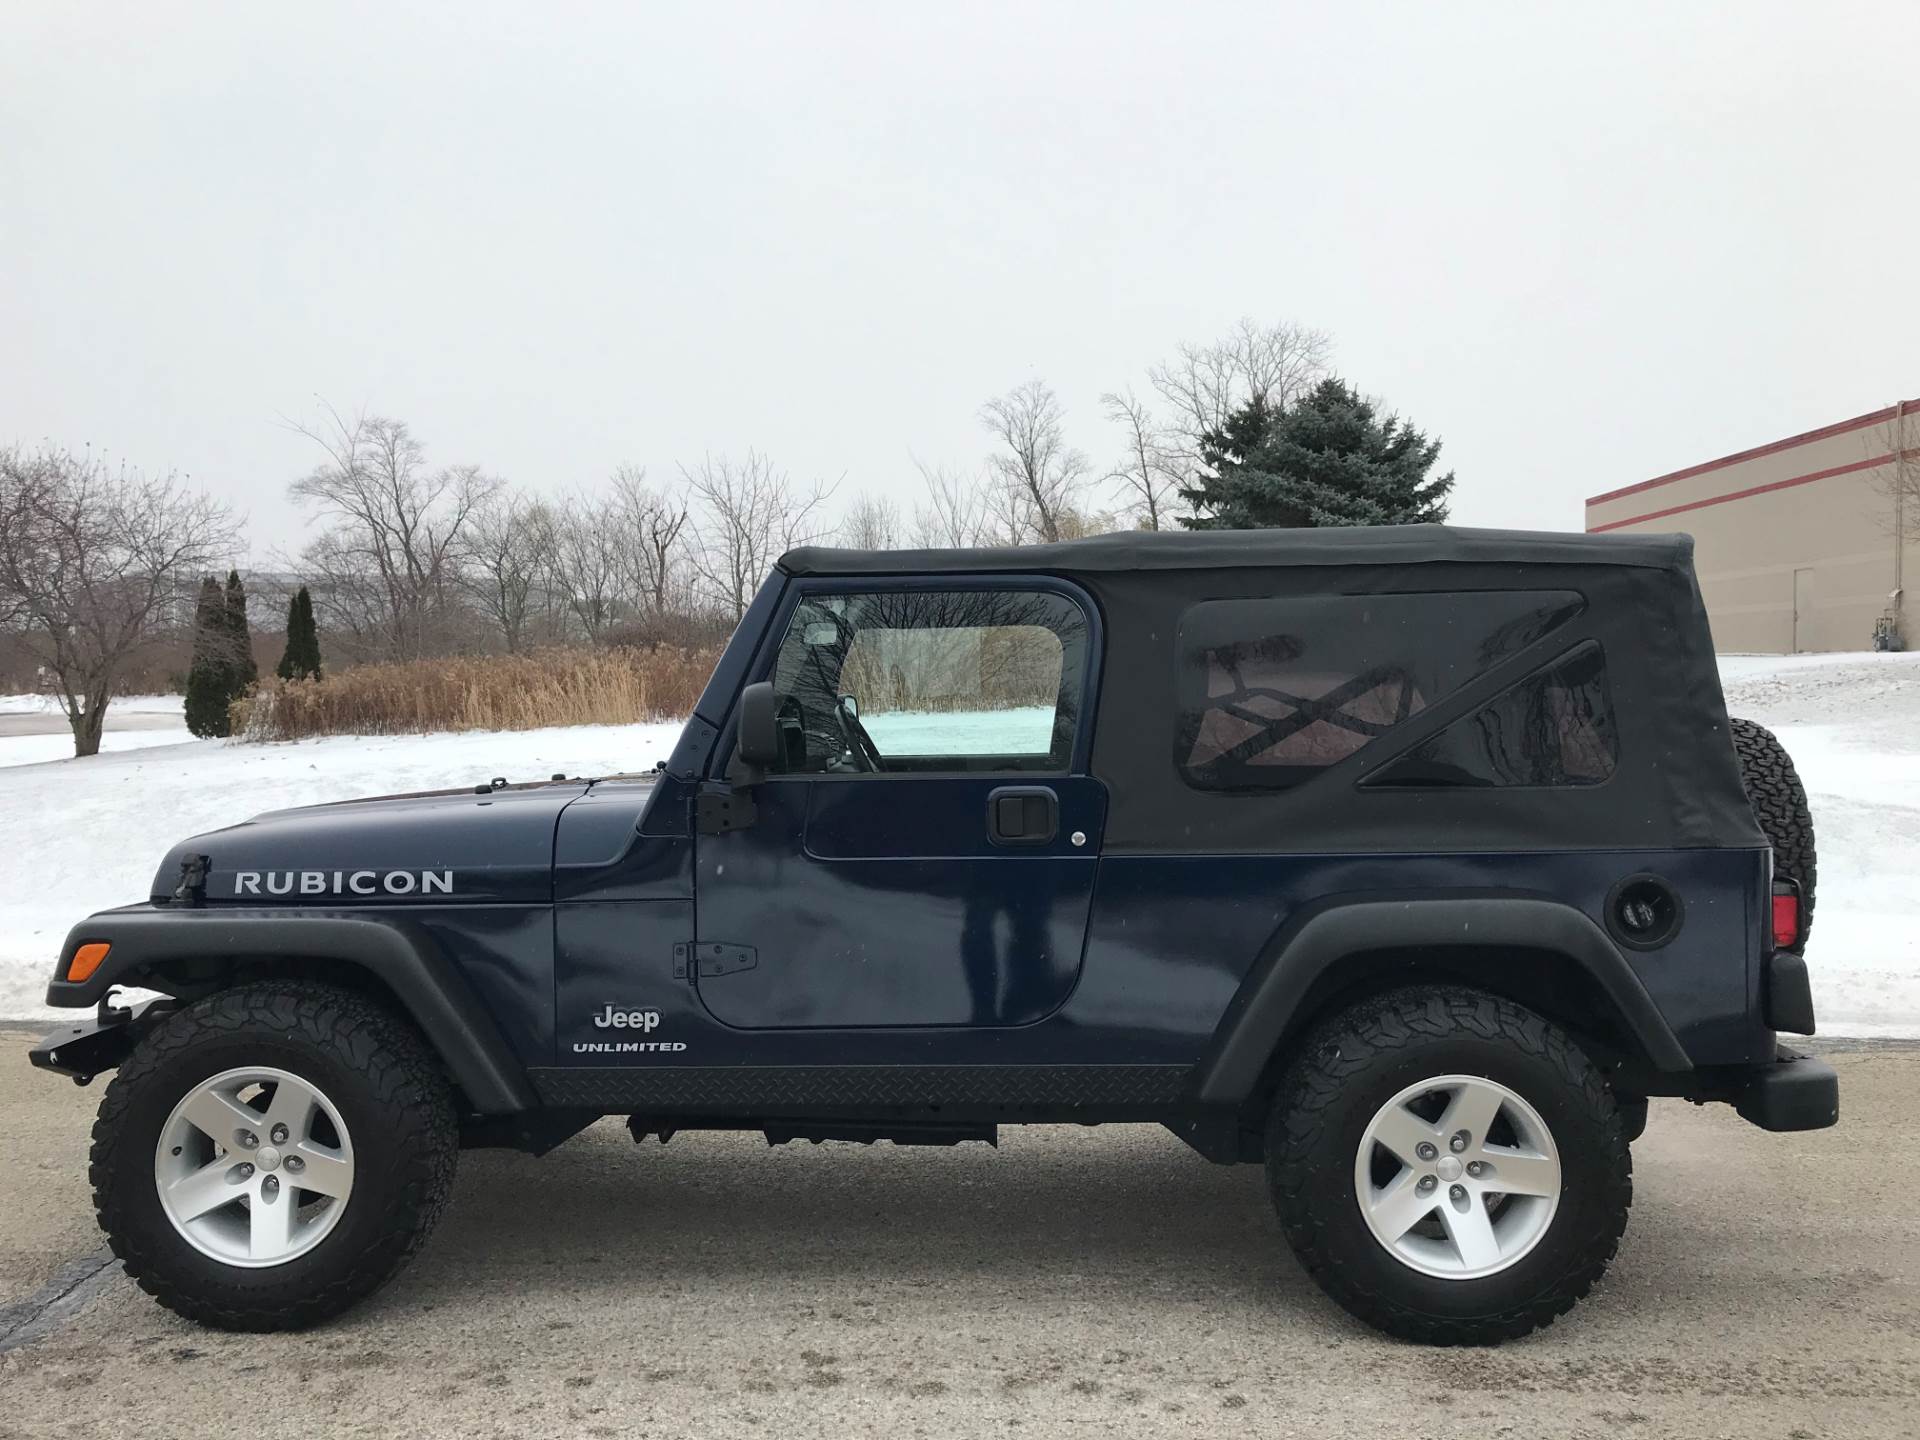 2006 Jeep Wrangler Unlimited Rubicon 2dr SUV 4WD in Big Bend, Wisconsin - Photo 111